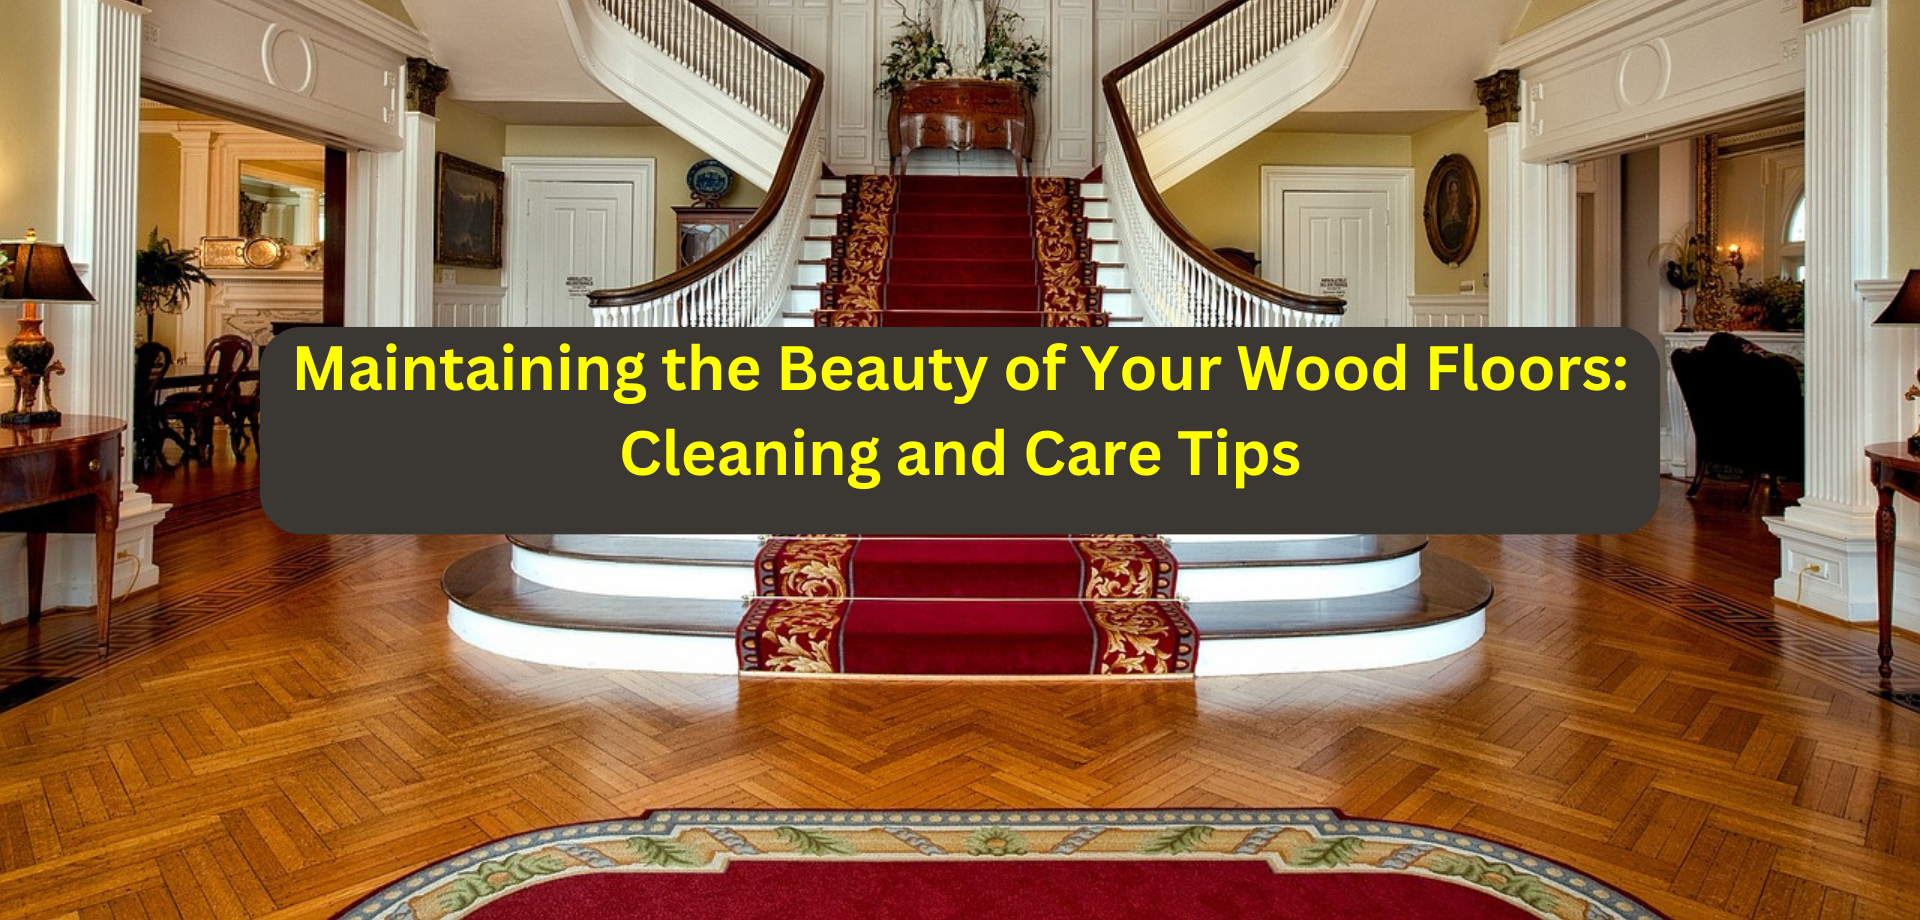 Maintaining the Beauty of Your Wood Floors